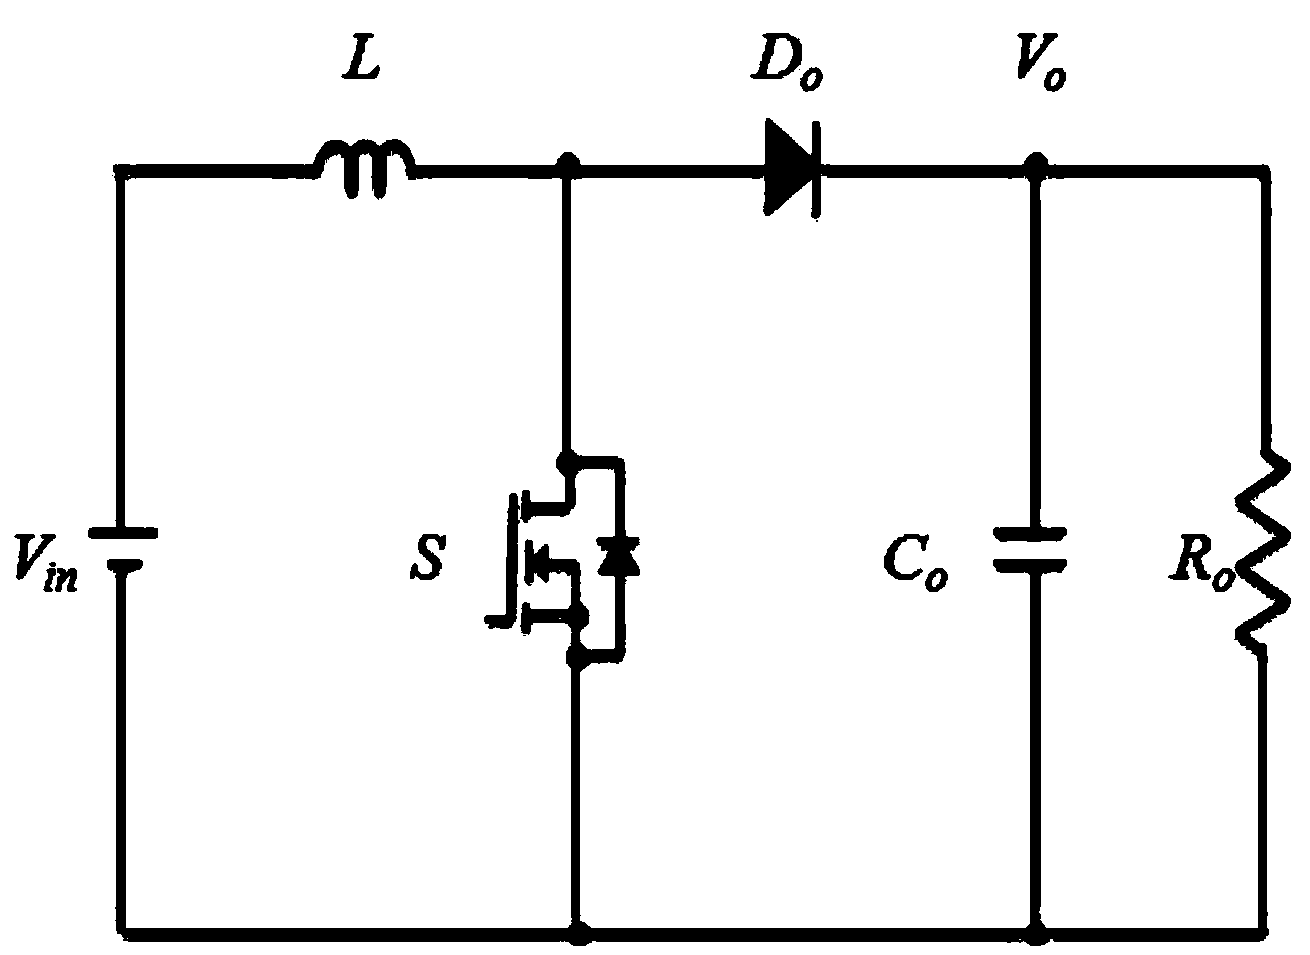 Z-source high-gain low-switching-stress direct current boost converter